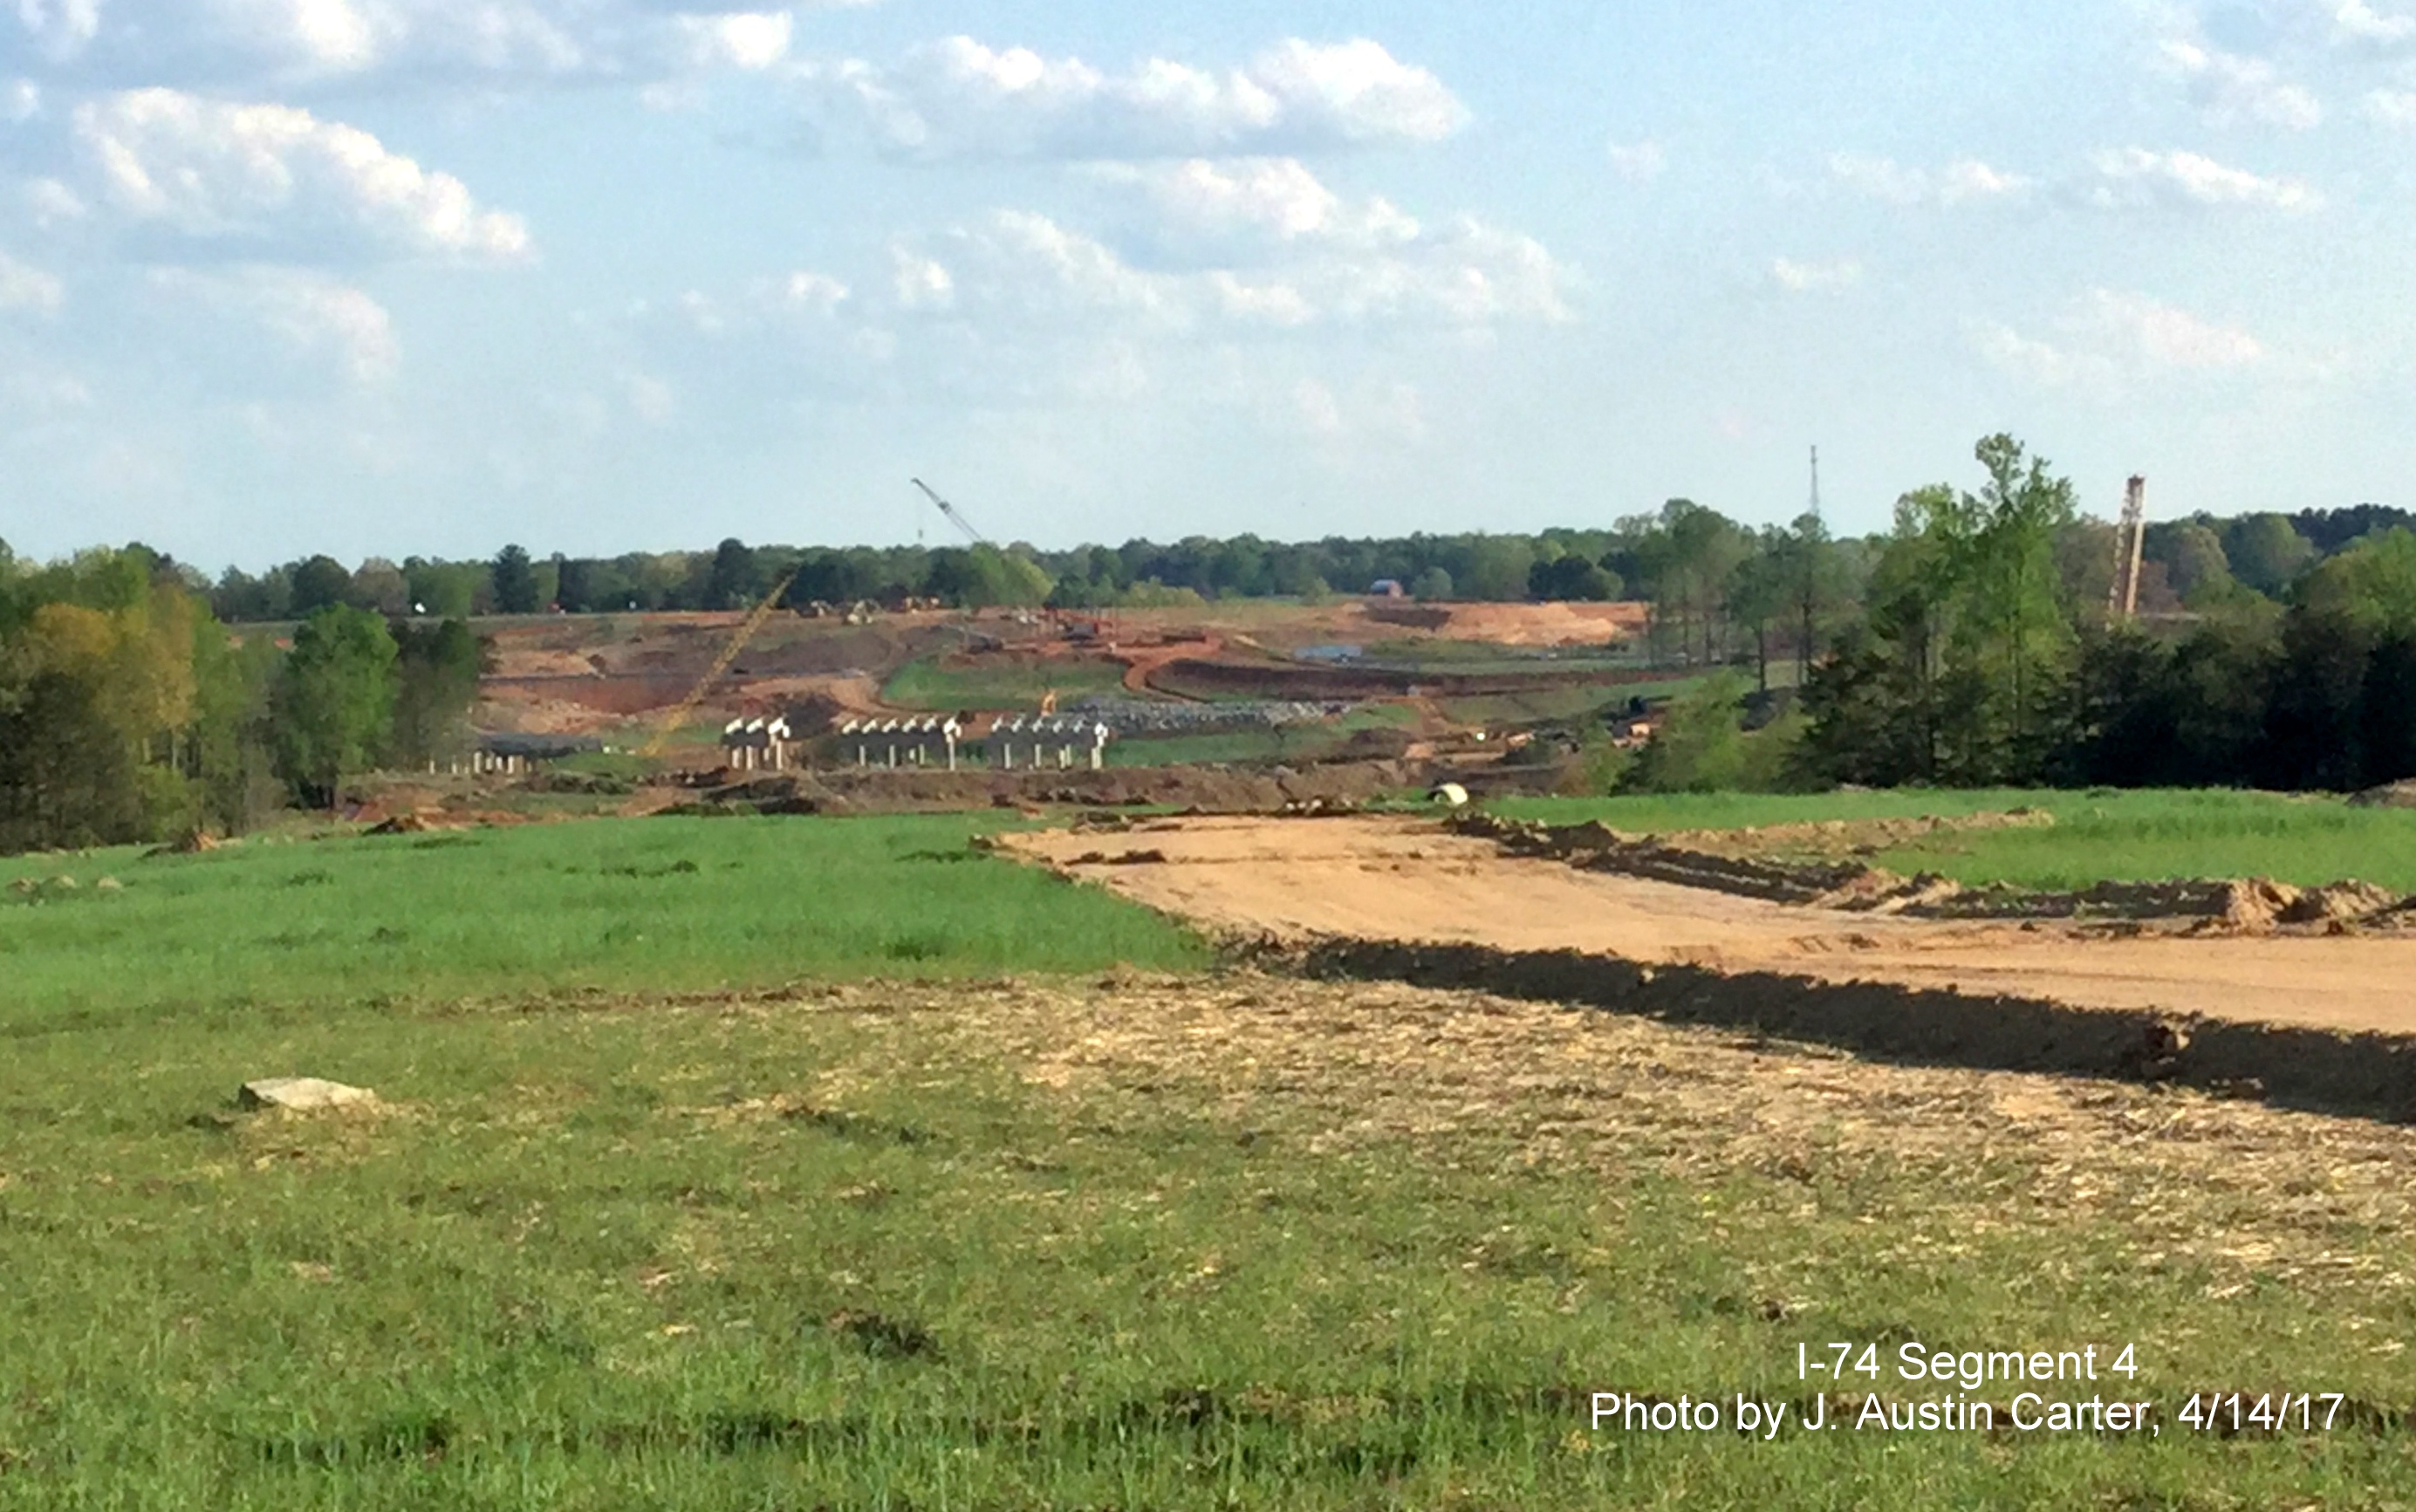 Image taken of view looking at southern end of I-74/Winston-Salem Beltway project and Future 
        interchange with Business 40/US 421/NC 150, by J. Austin Carter